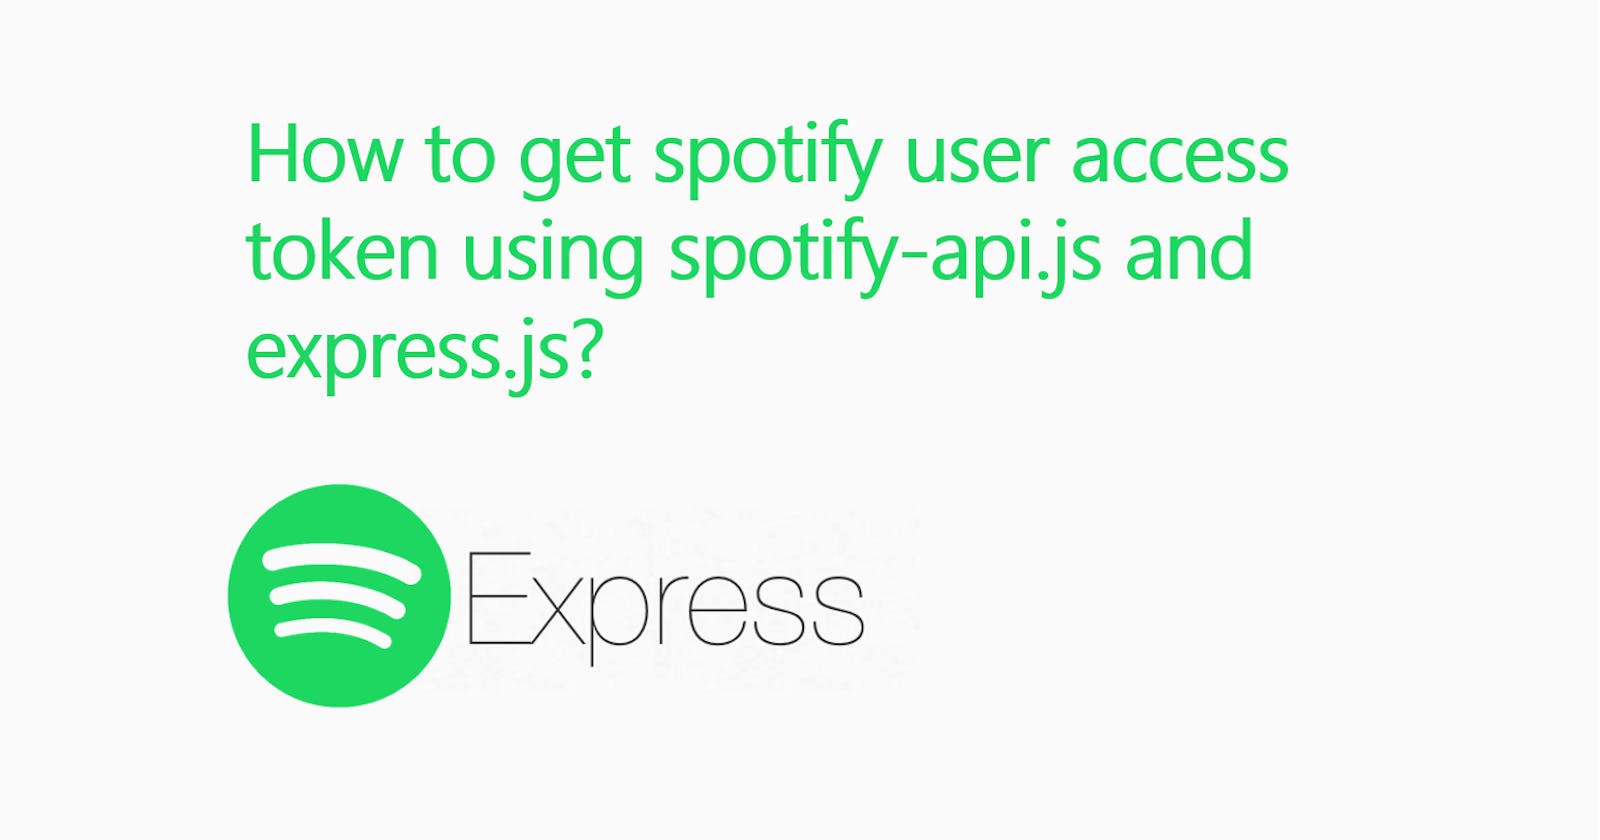 How to get spotify user access token using spotify-api.js and express.js?